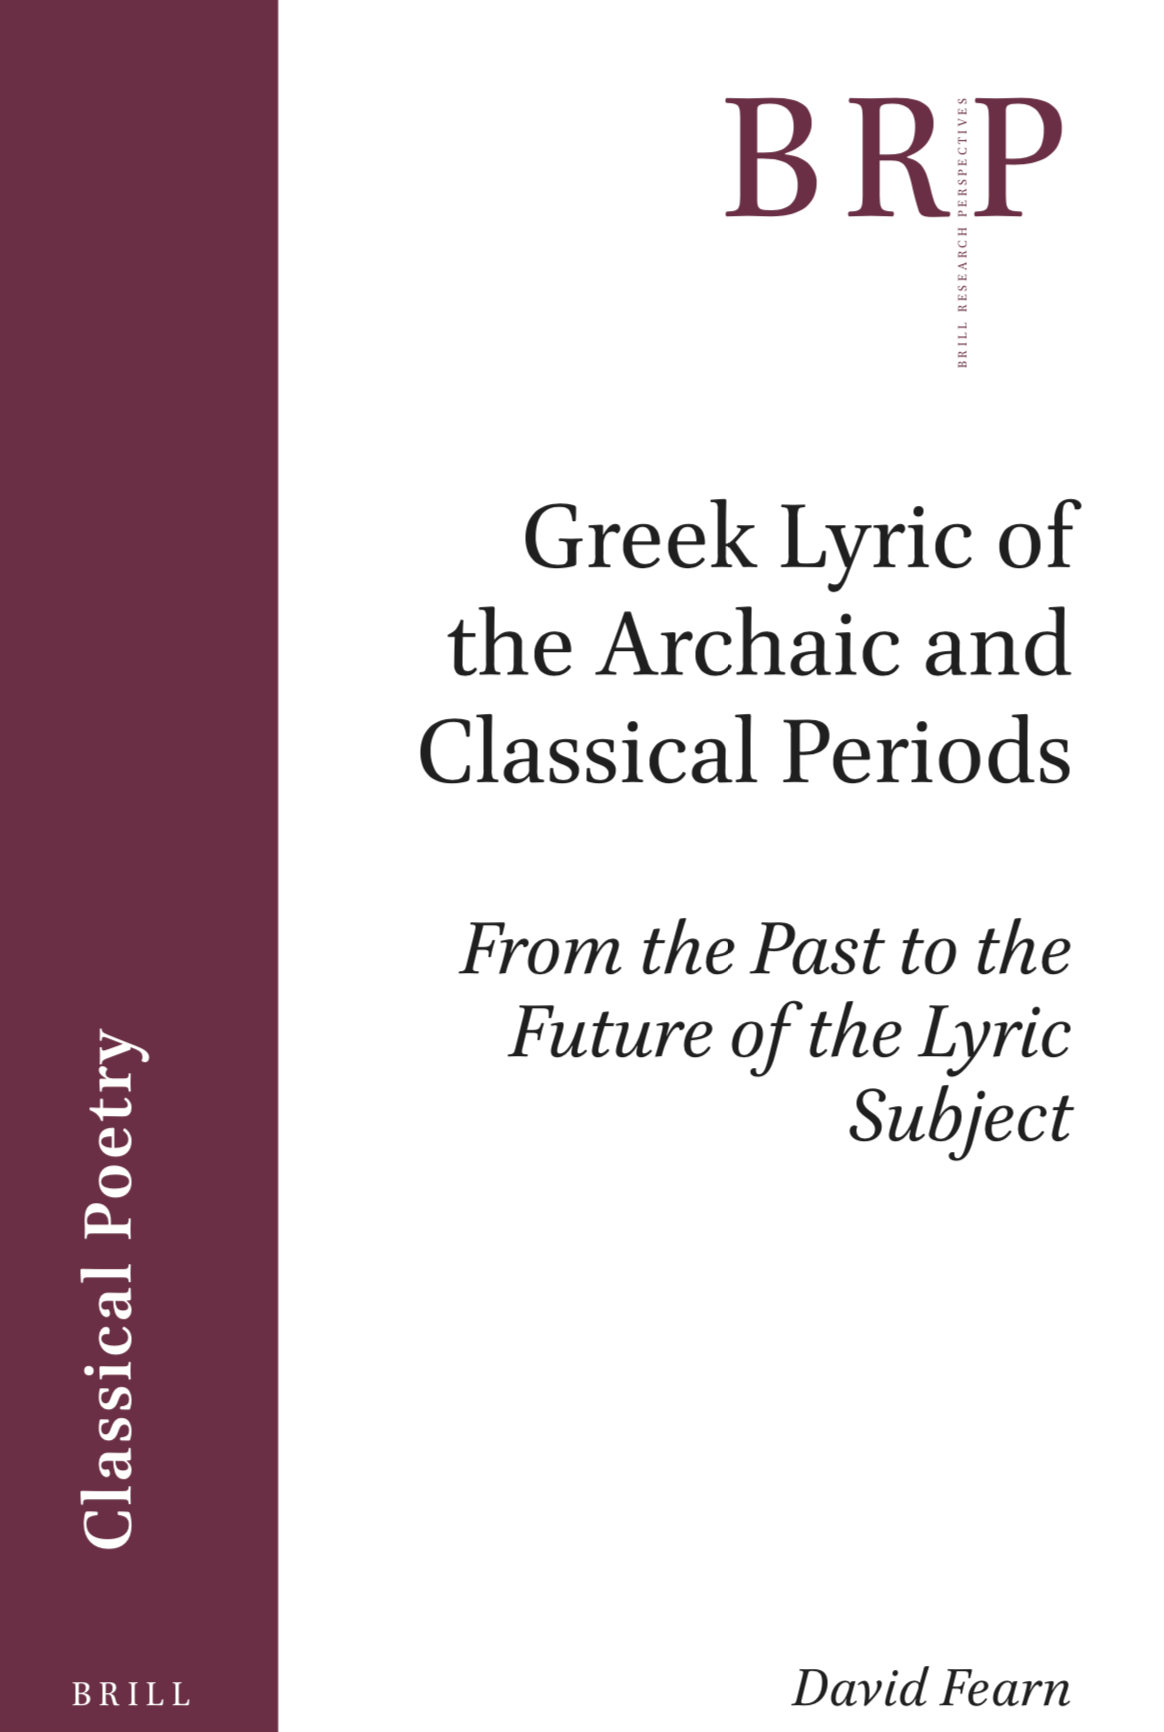 Fearn, Greek Lyric of the Archaic and Classical Periods (Brill, 2020)